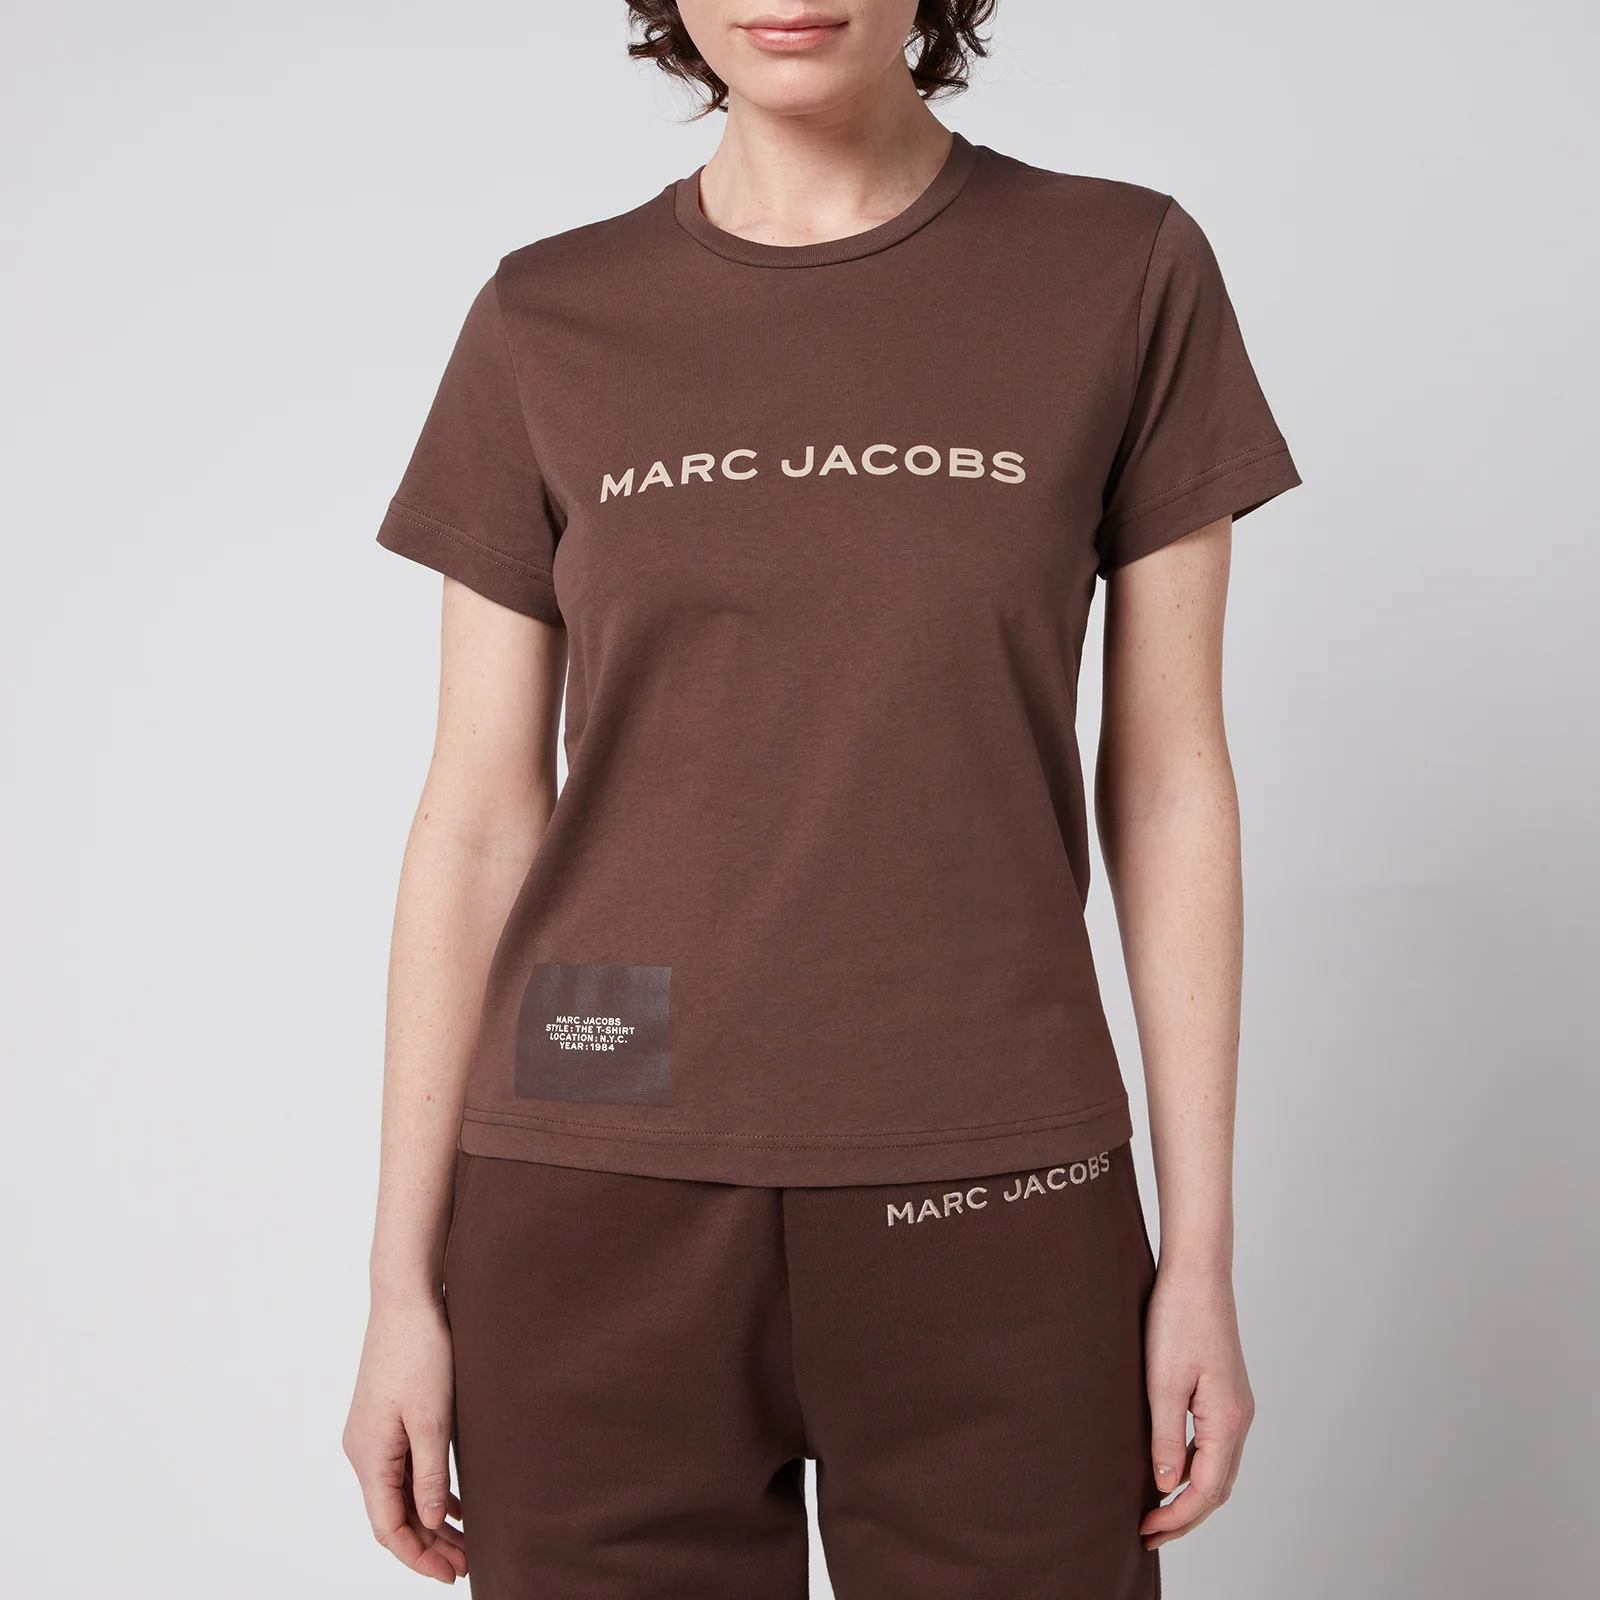 Marc Jacobs Women's The T-Shirt - Shaved Chocolate Image 1